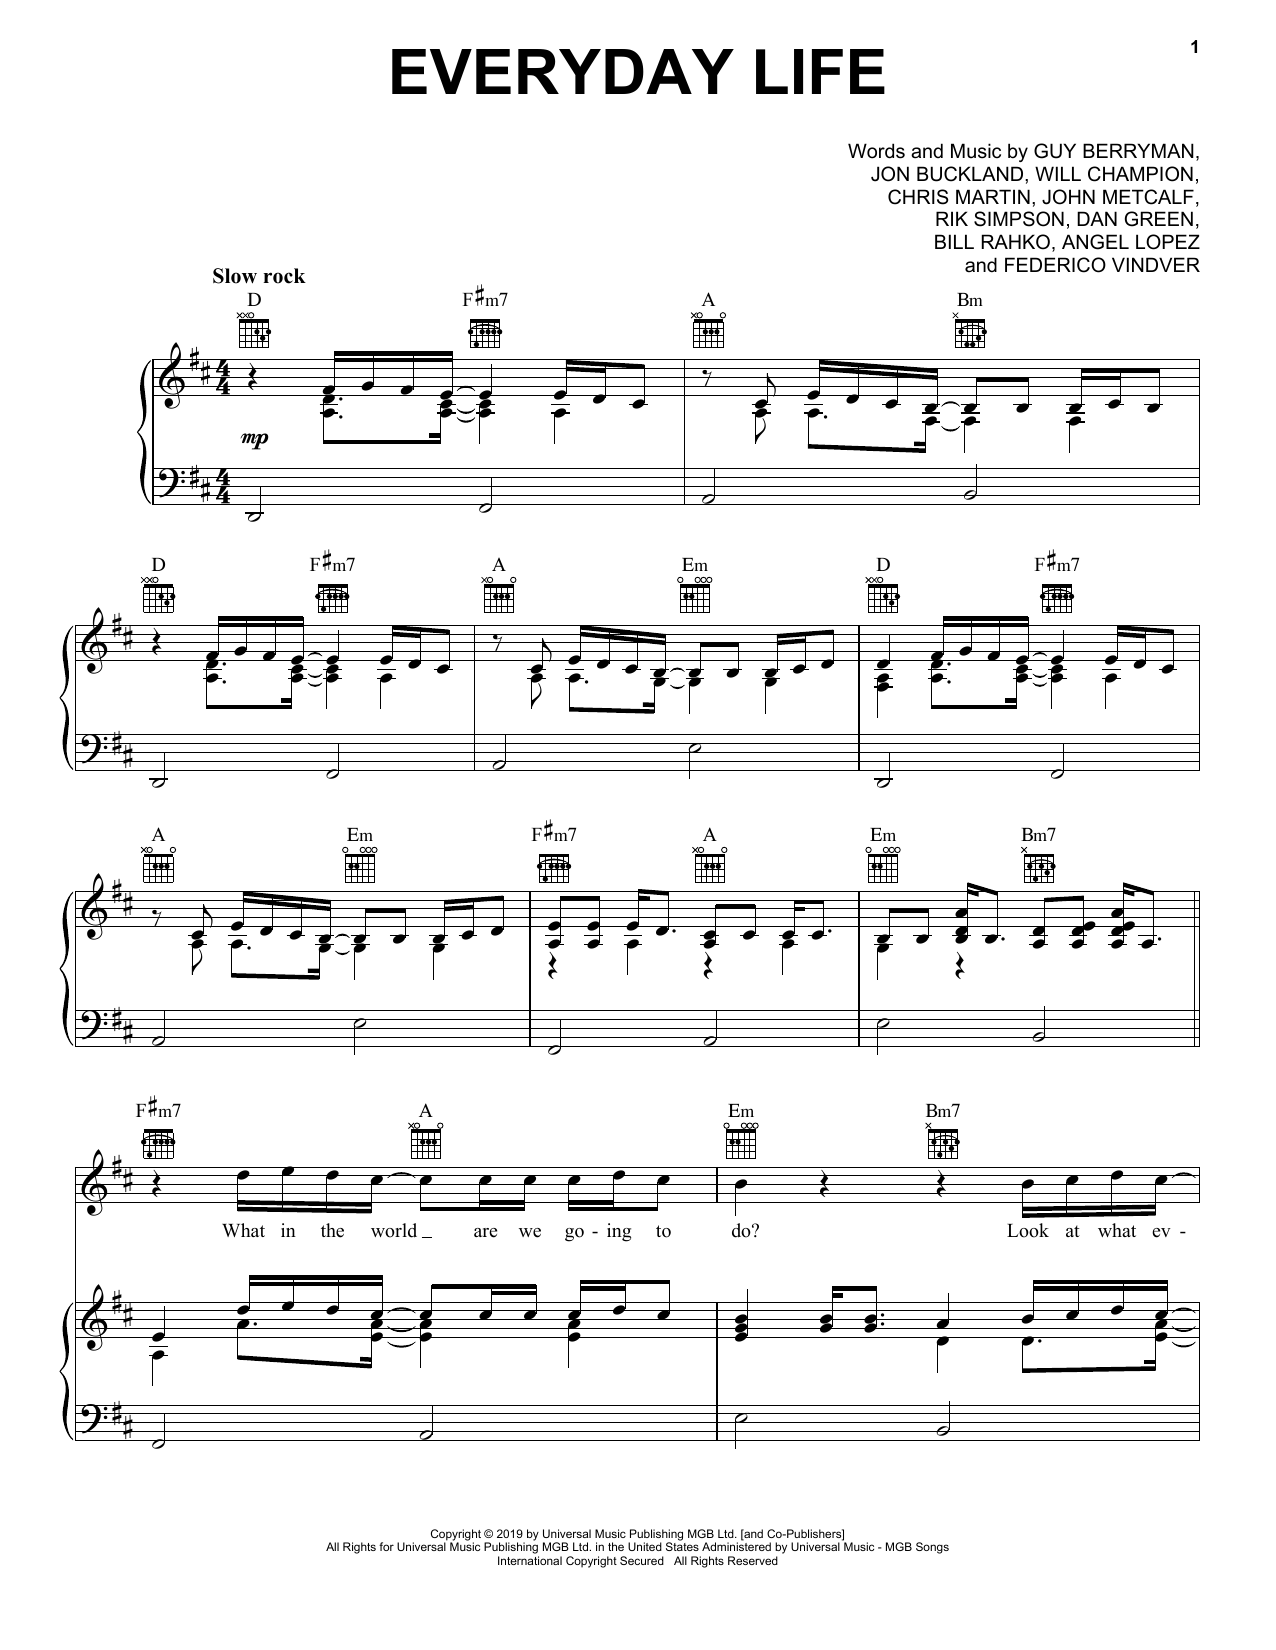 Download Coldplay Everyday Life Sheet Music